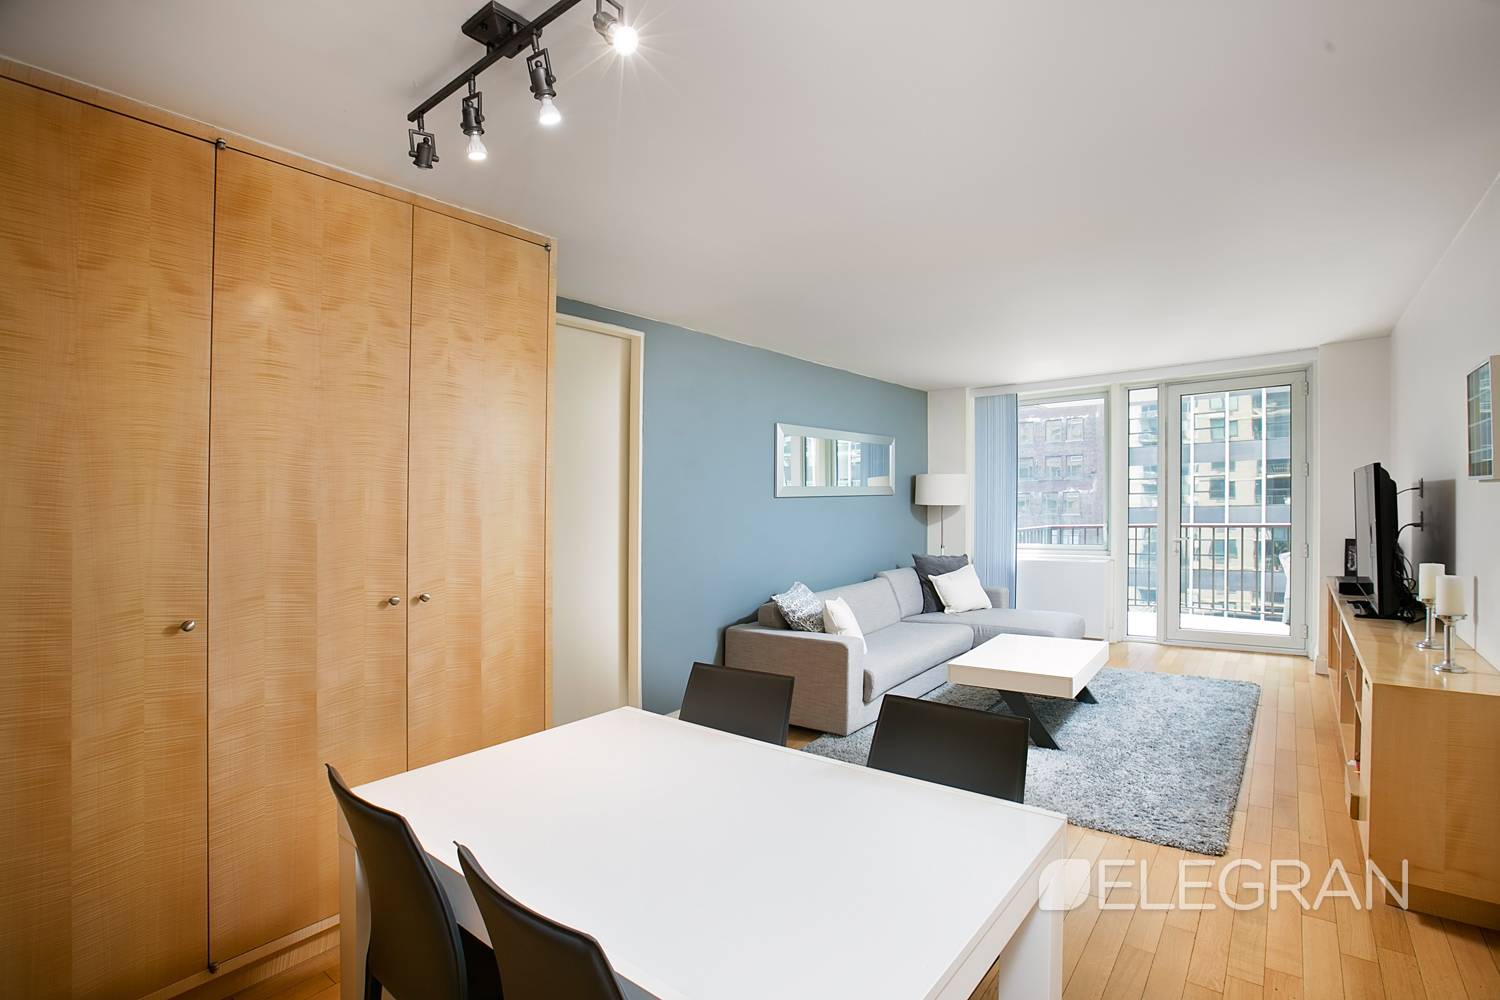 Be amazed by this South facing 2 bedroom, 2 bathroom condo located in one of the best areas of Midtown.